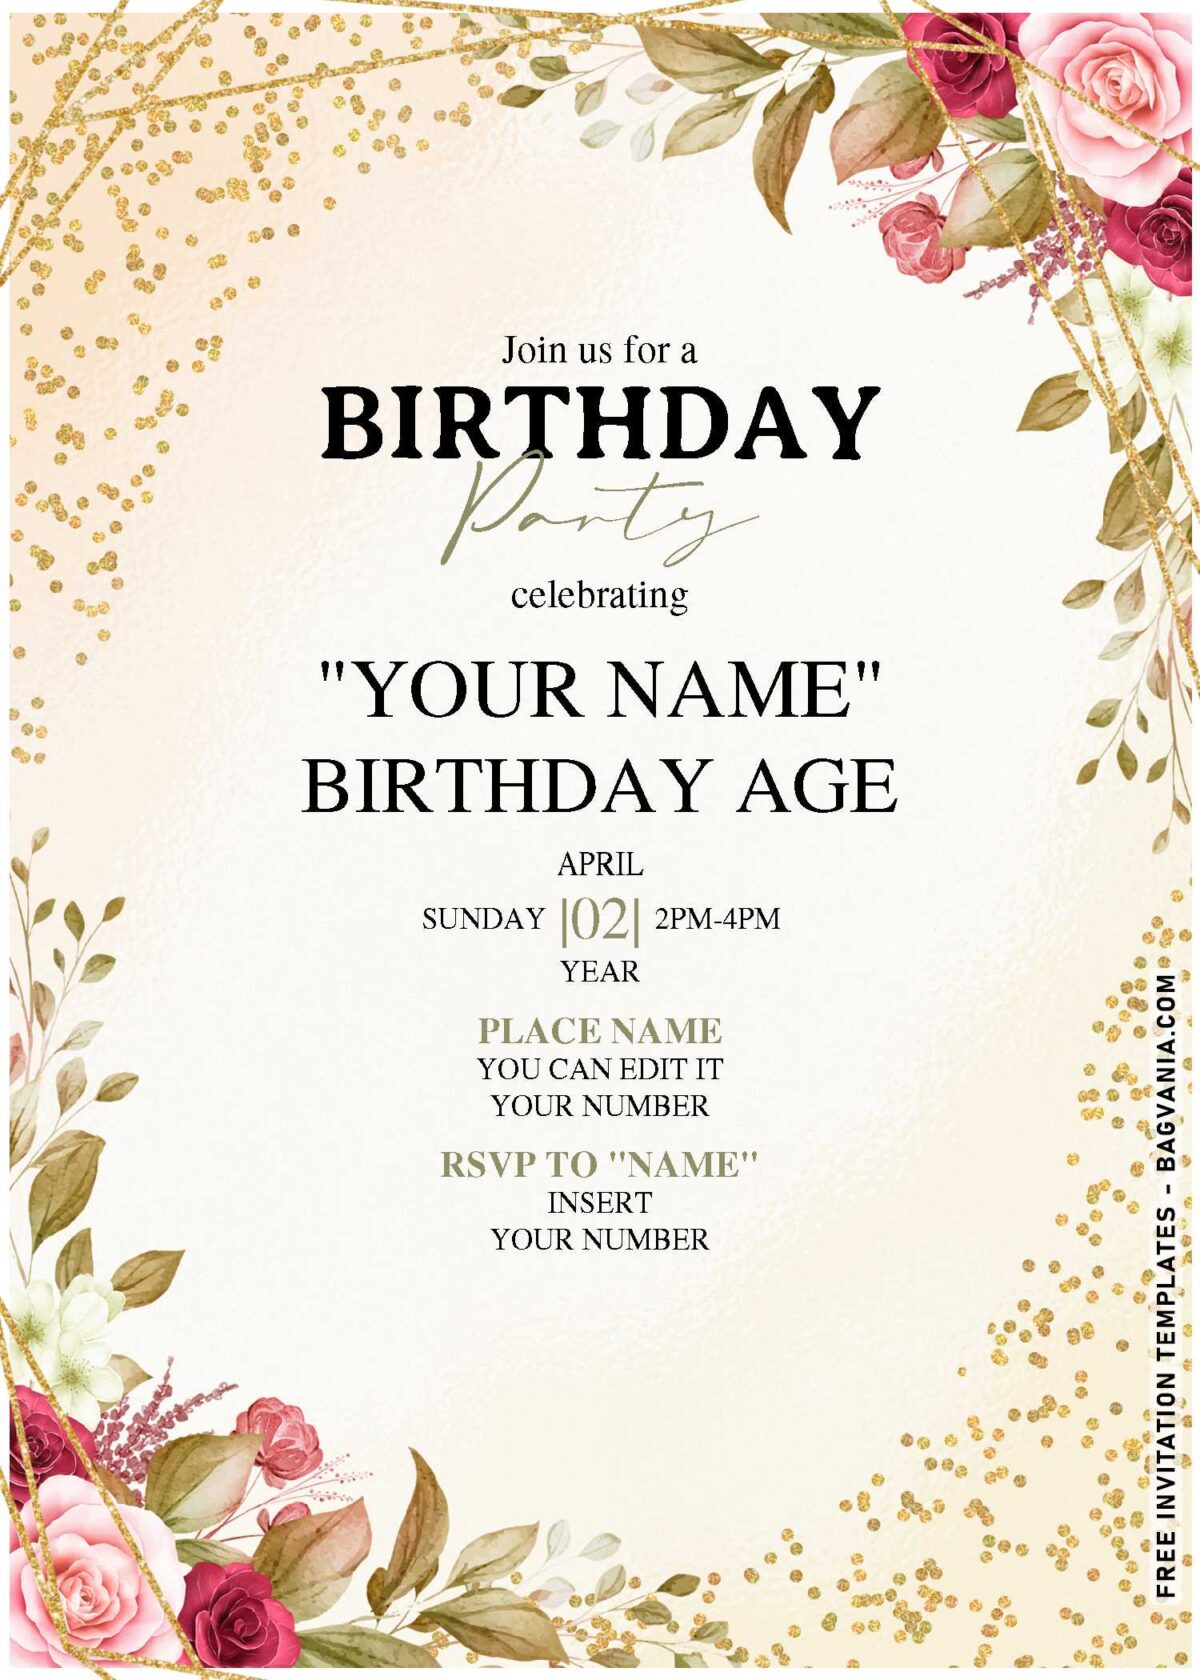 (Free Editable PDF) Champagne Gold Glitter Floral Birthday Invitation Templates with vintage design ideas